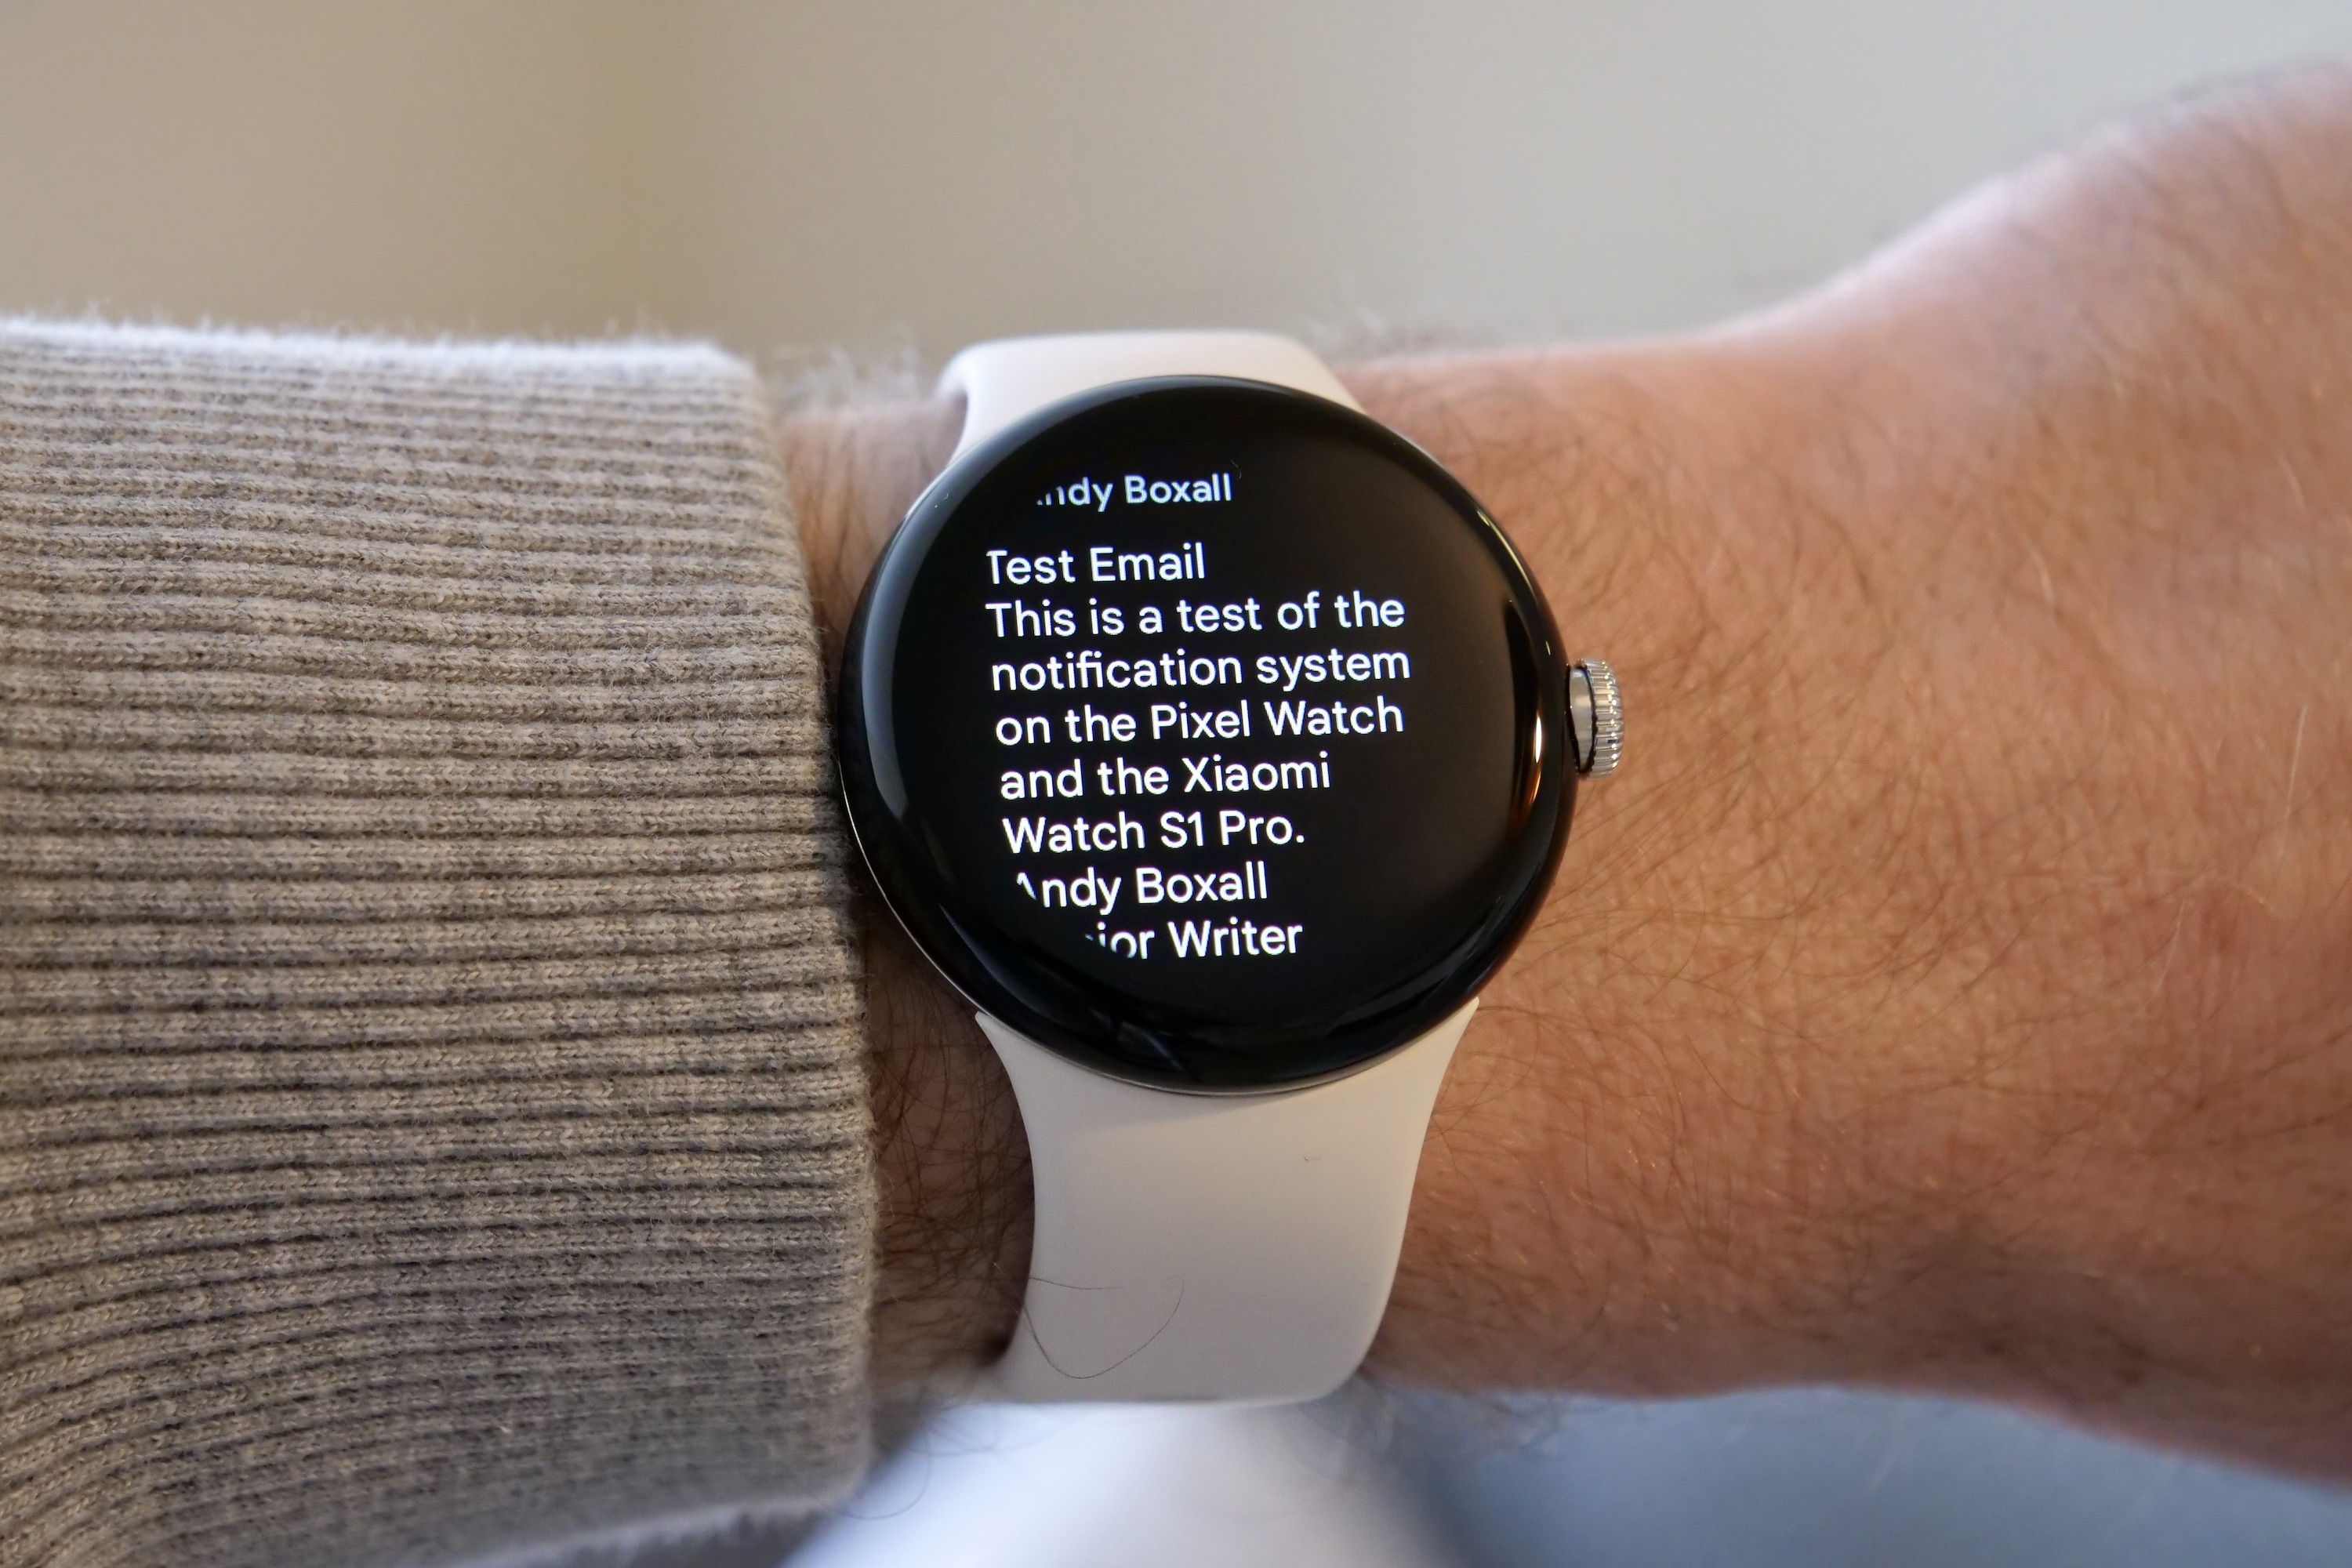 Notifications on the Google Pixel Watch.